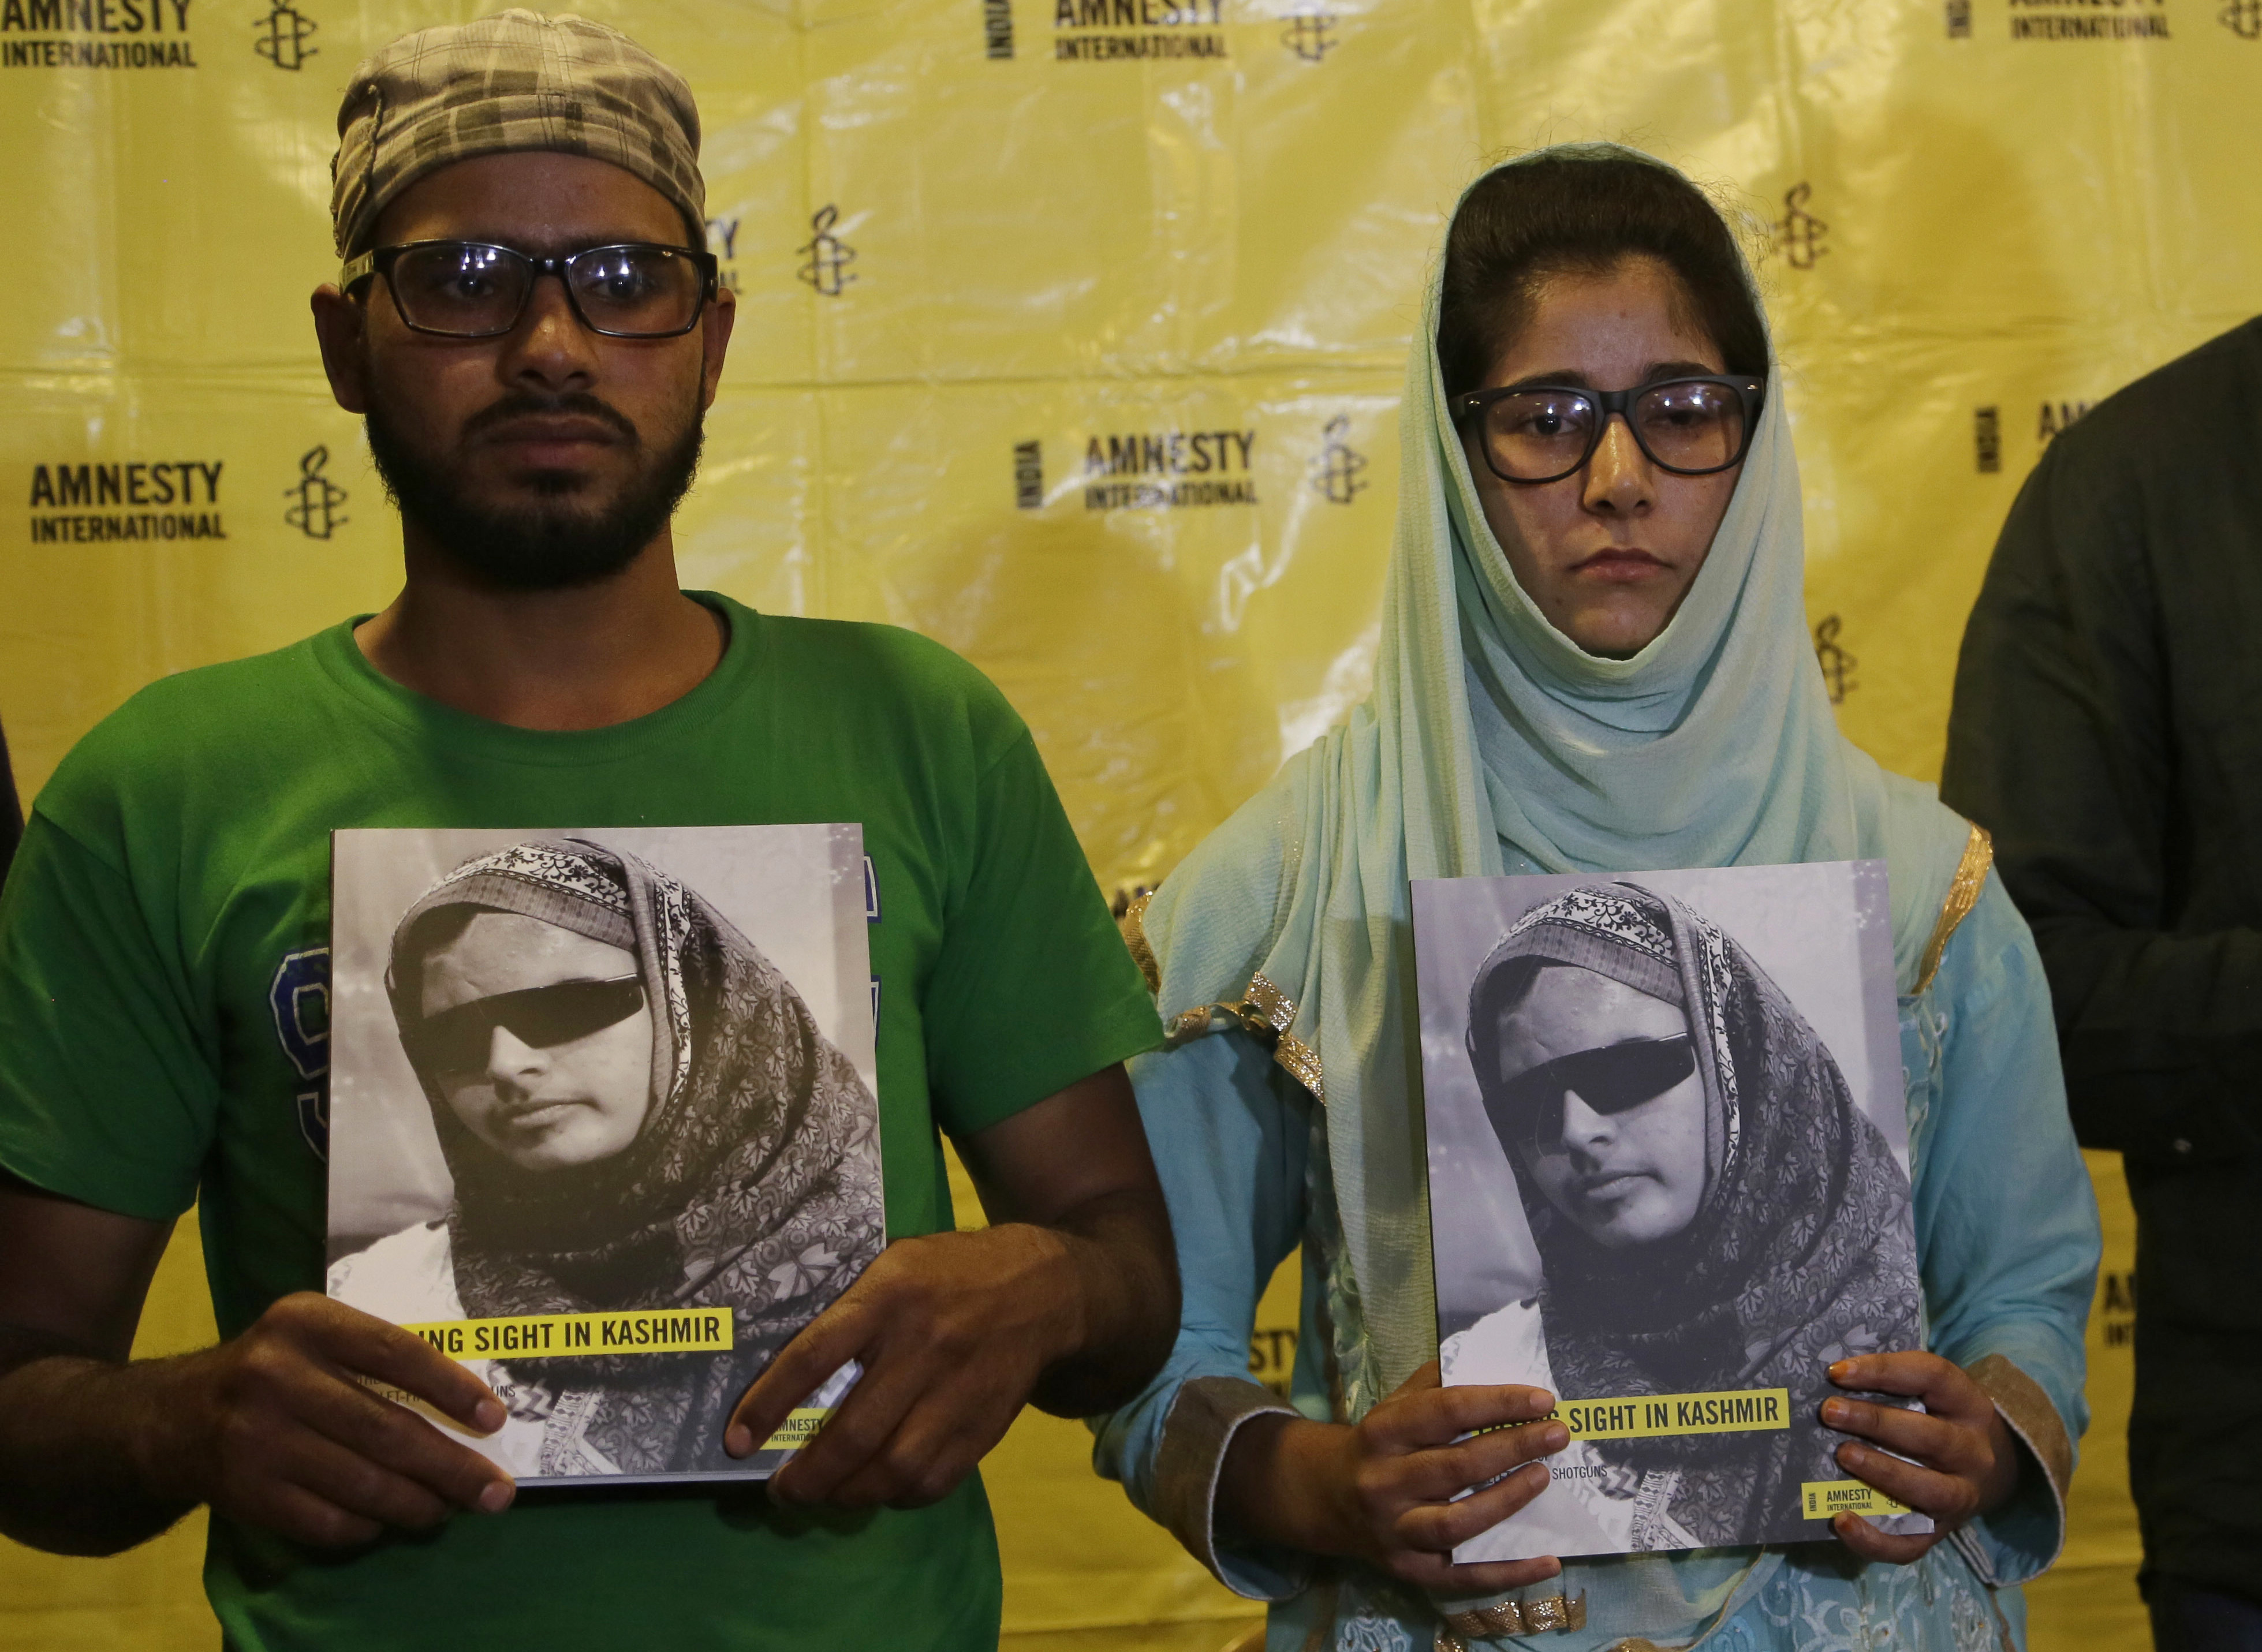 Shotgun victims victims Manzoor Ahmed, left and Shabrooza Mir, hold copies of a report by Amnesty International during its release in Srinagar, Indian controlled Kashmir, Wednesday, Sept. 13, 2017. The human rights group has called on India to immediately ban the use of shotguns by government forces in suppressing protests against Indian rule in disputed Kashmir, saying pellets fired by the weapons have blinded and killed people indiscriminately. (AP Photo/Mukhtar Khan)